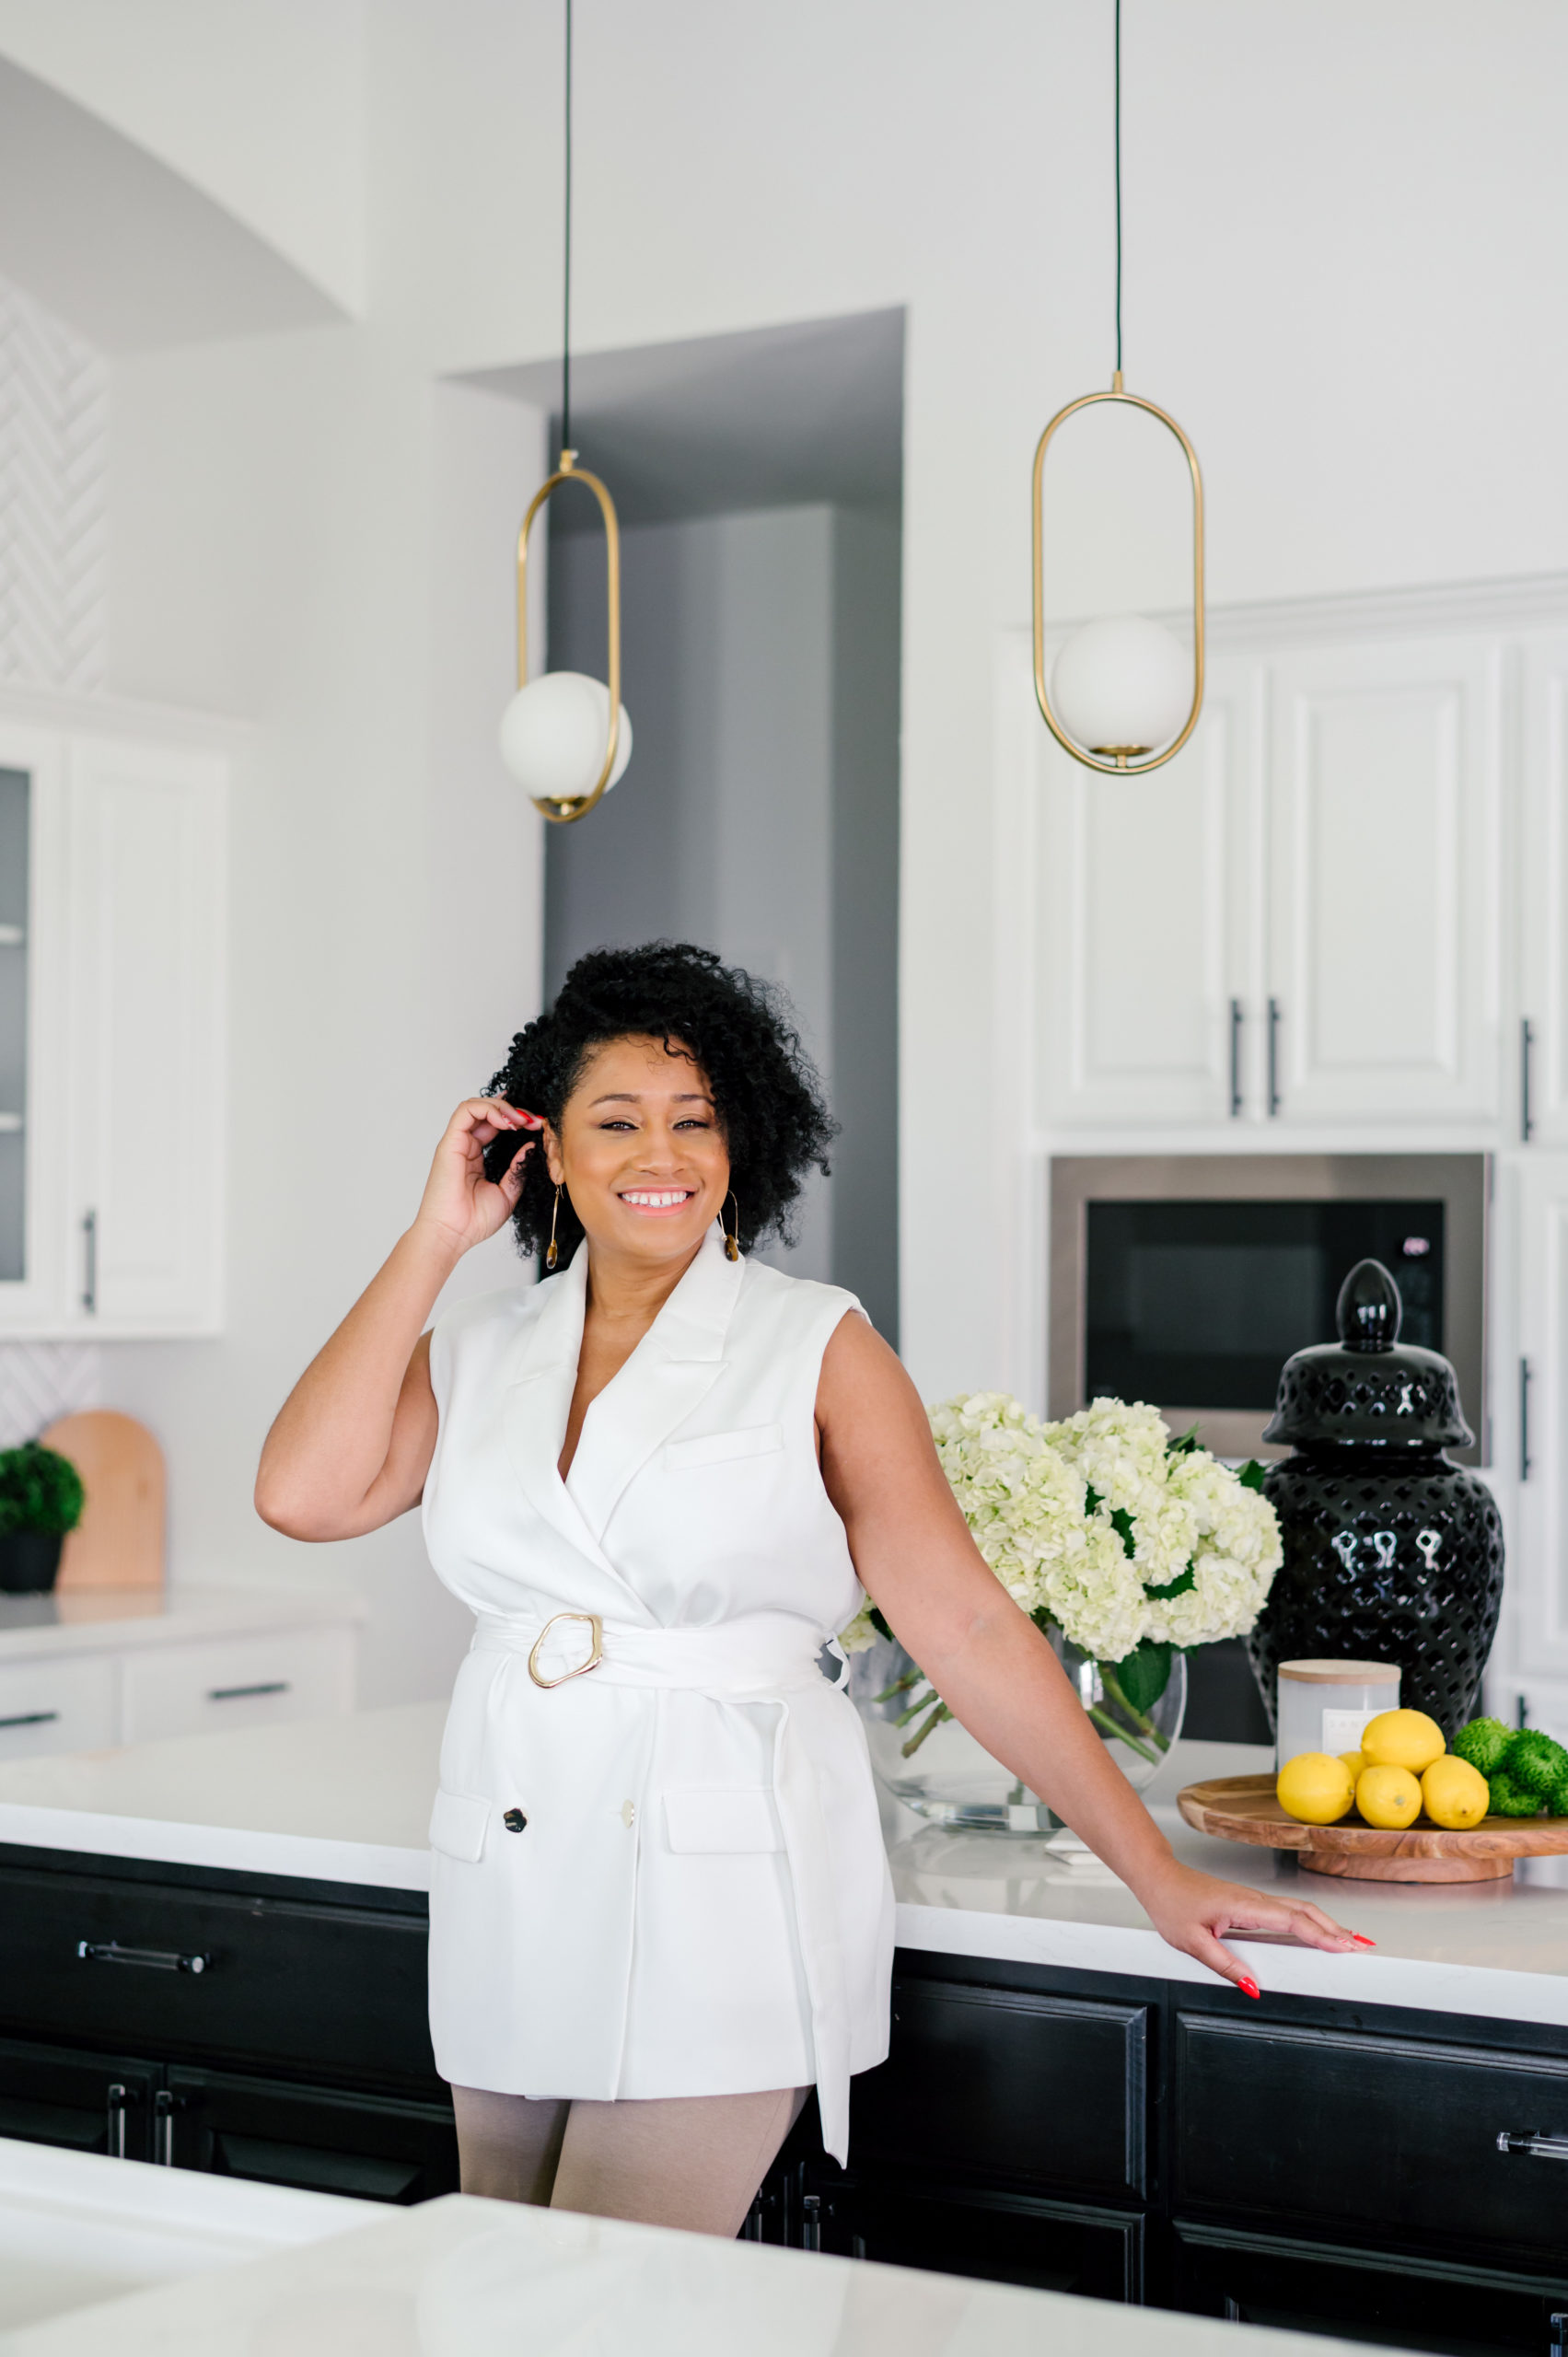 Professional interior photography of interior designer standing in a white blouse and khaki pants leaning on marble kitchen counter smiling